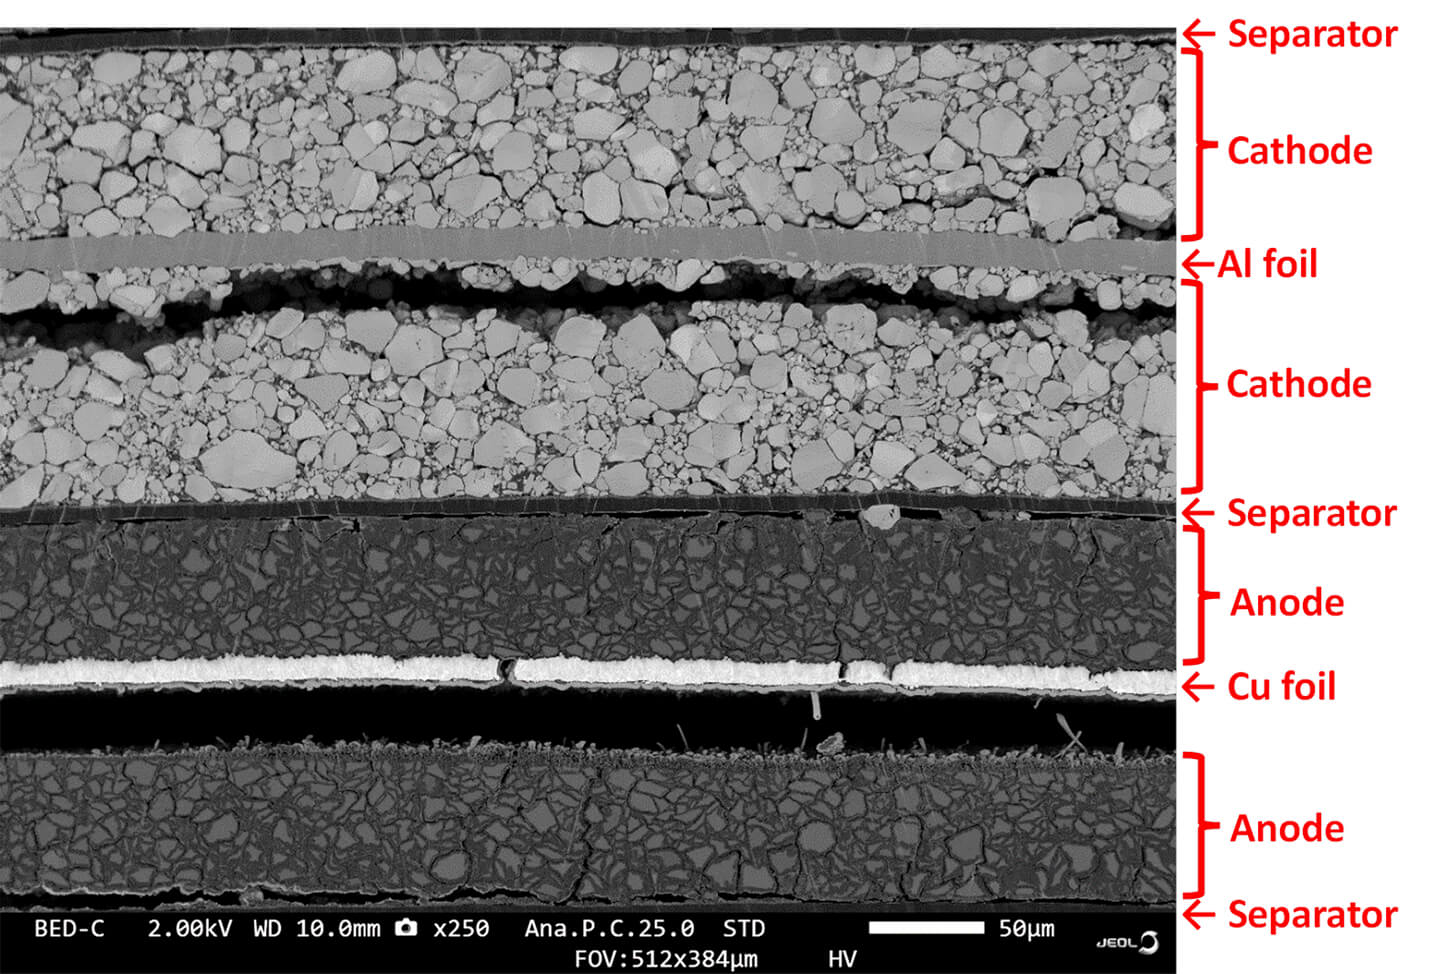 Achieving Pristine Cross Sections of Battery Samples for SEM